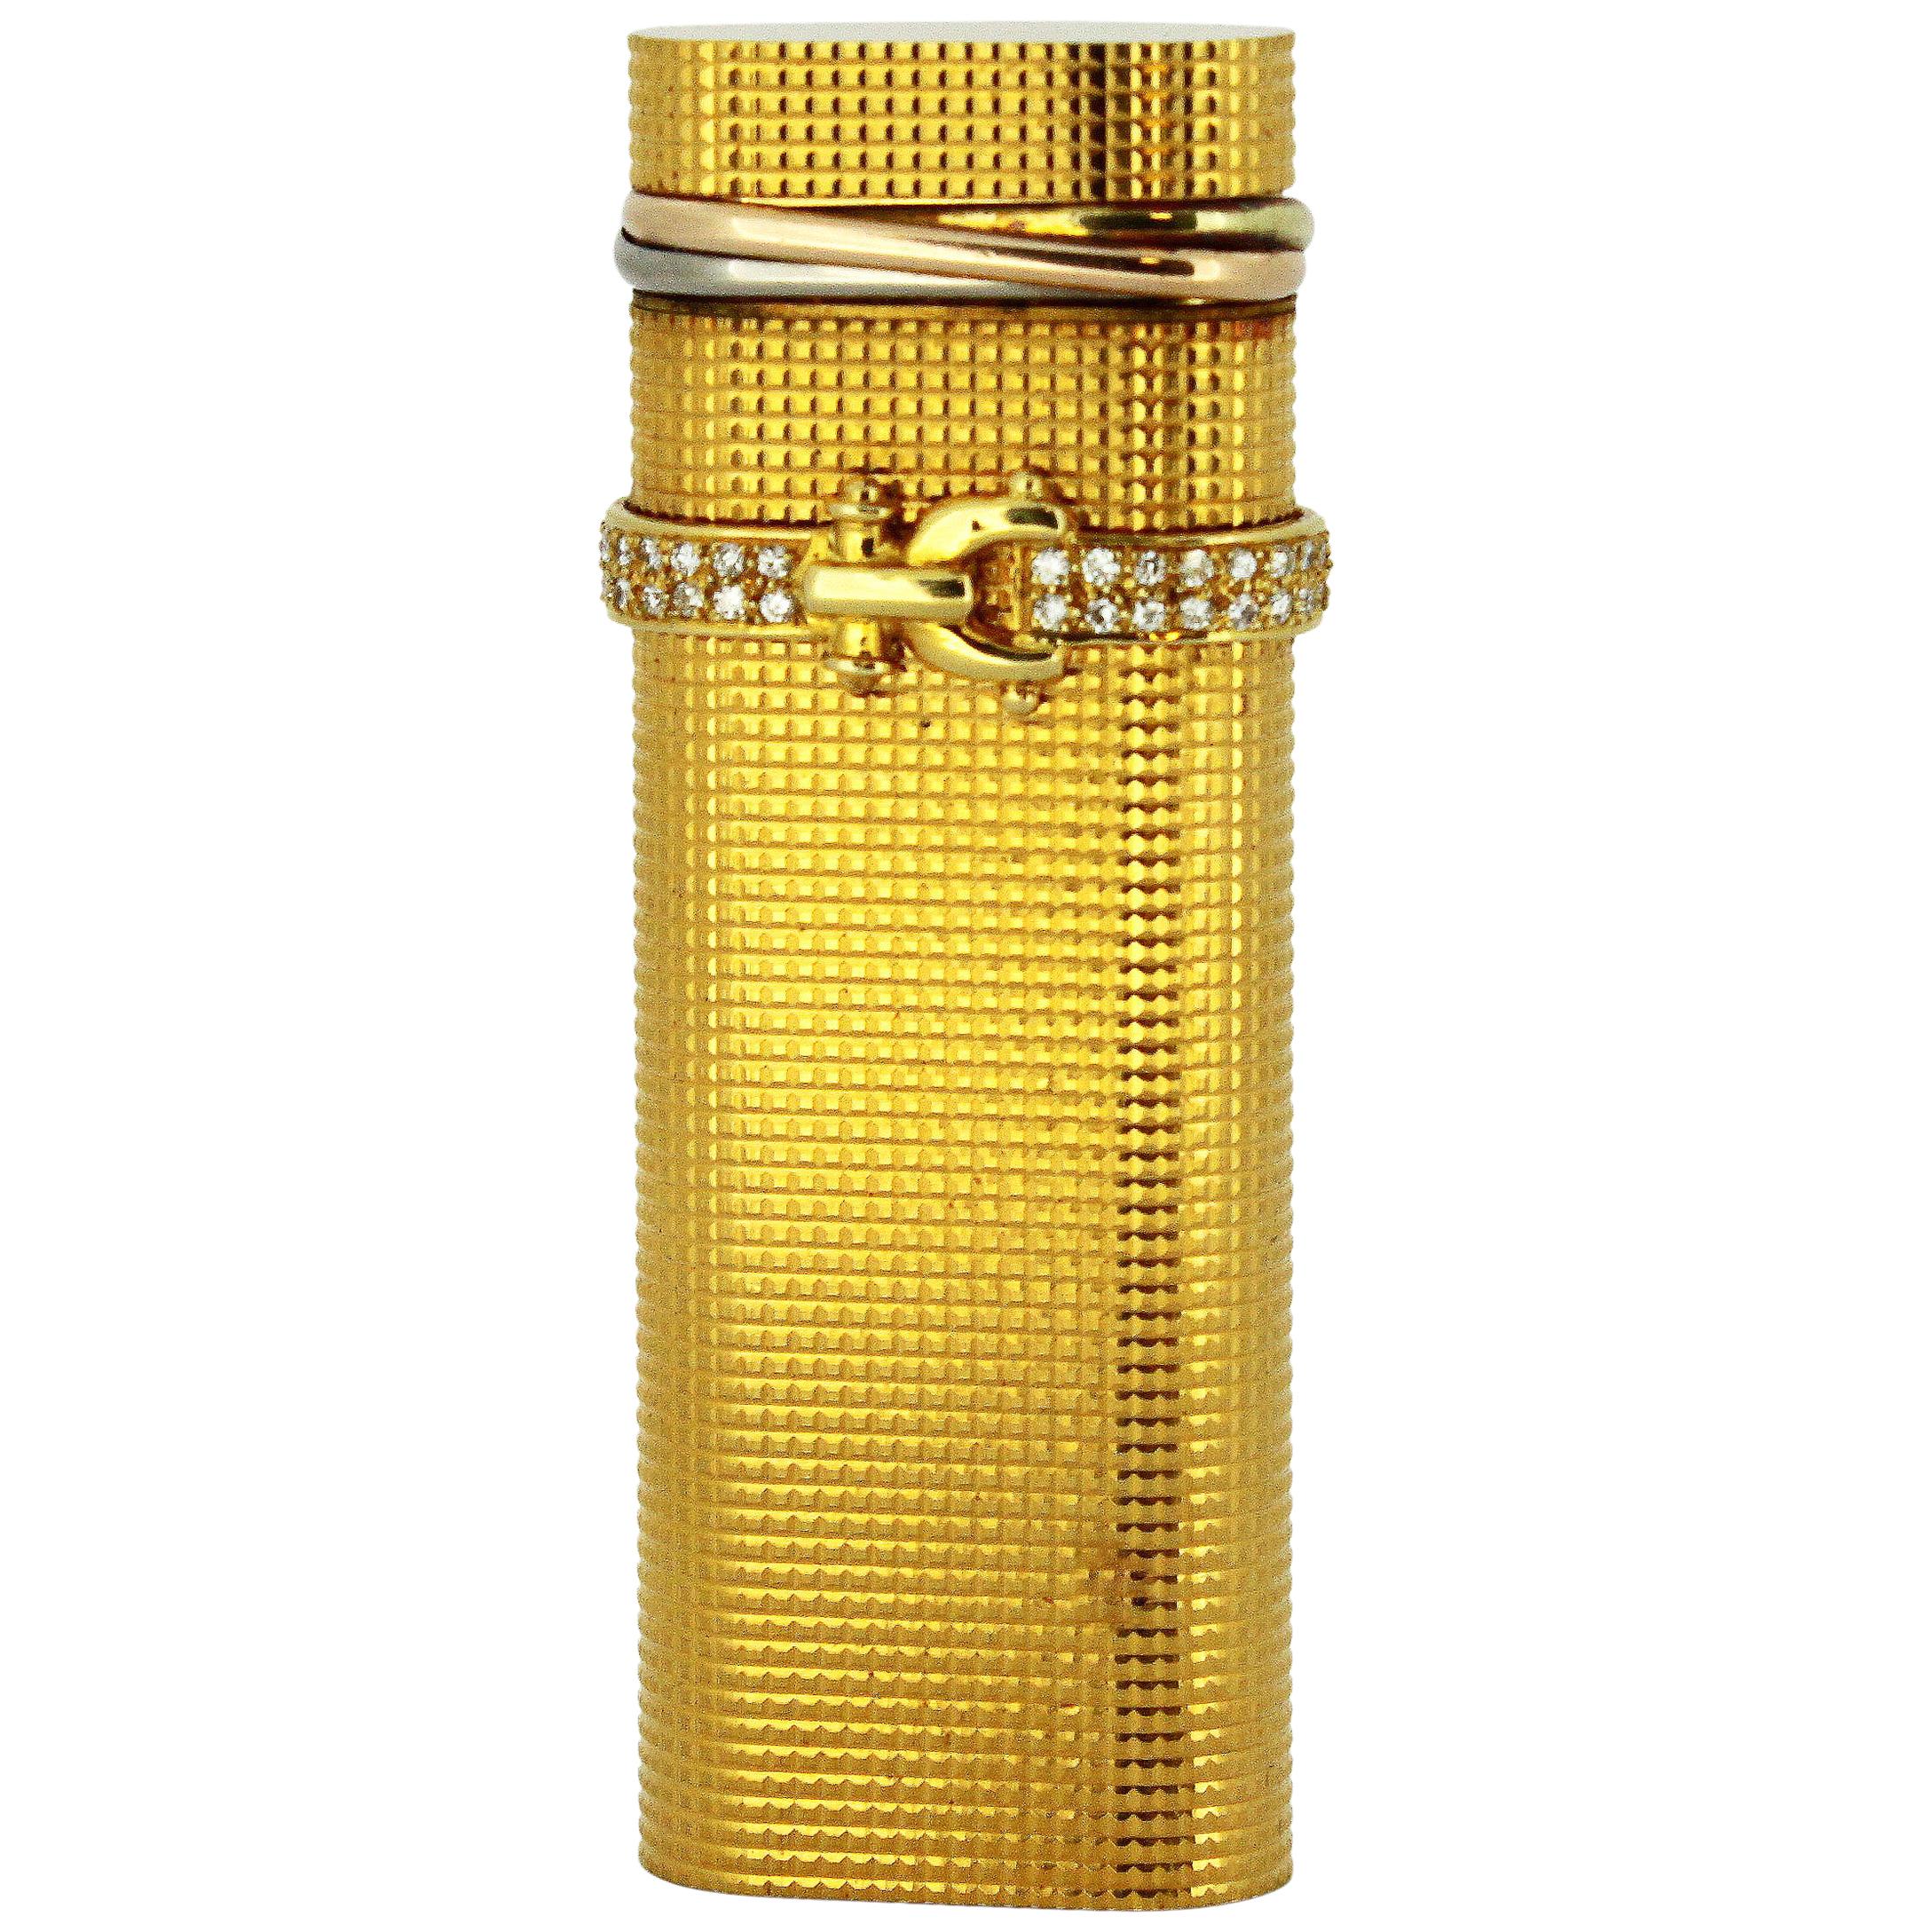 old cartier lighter price